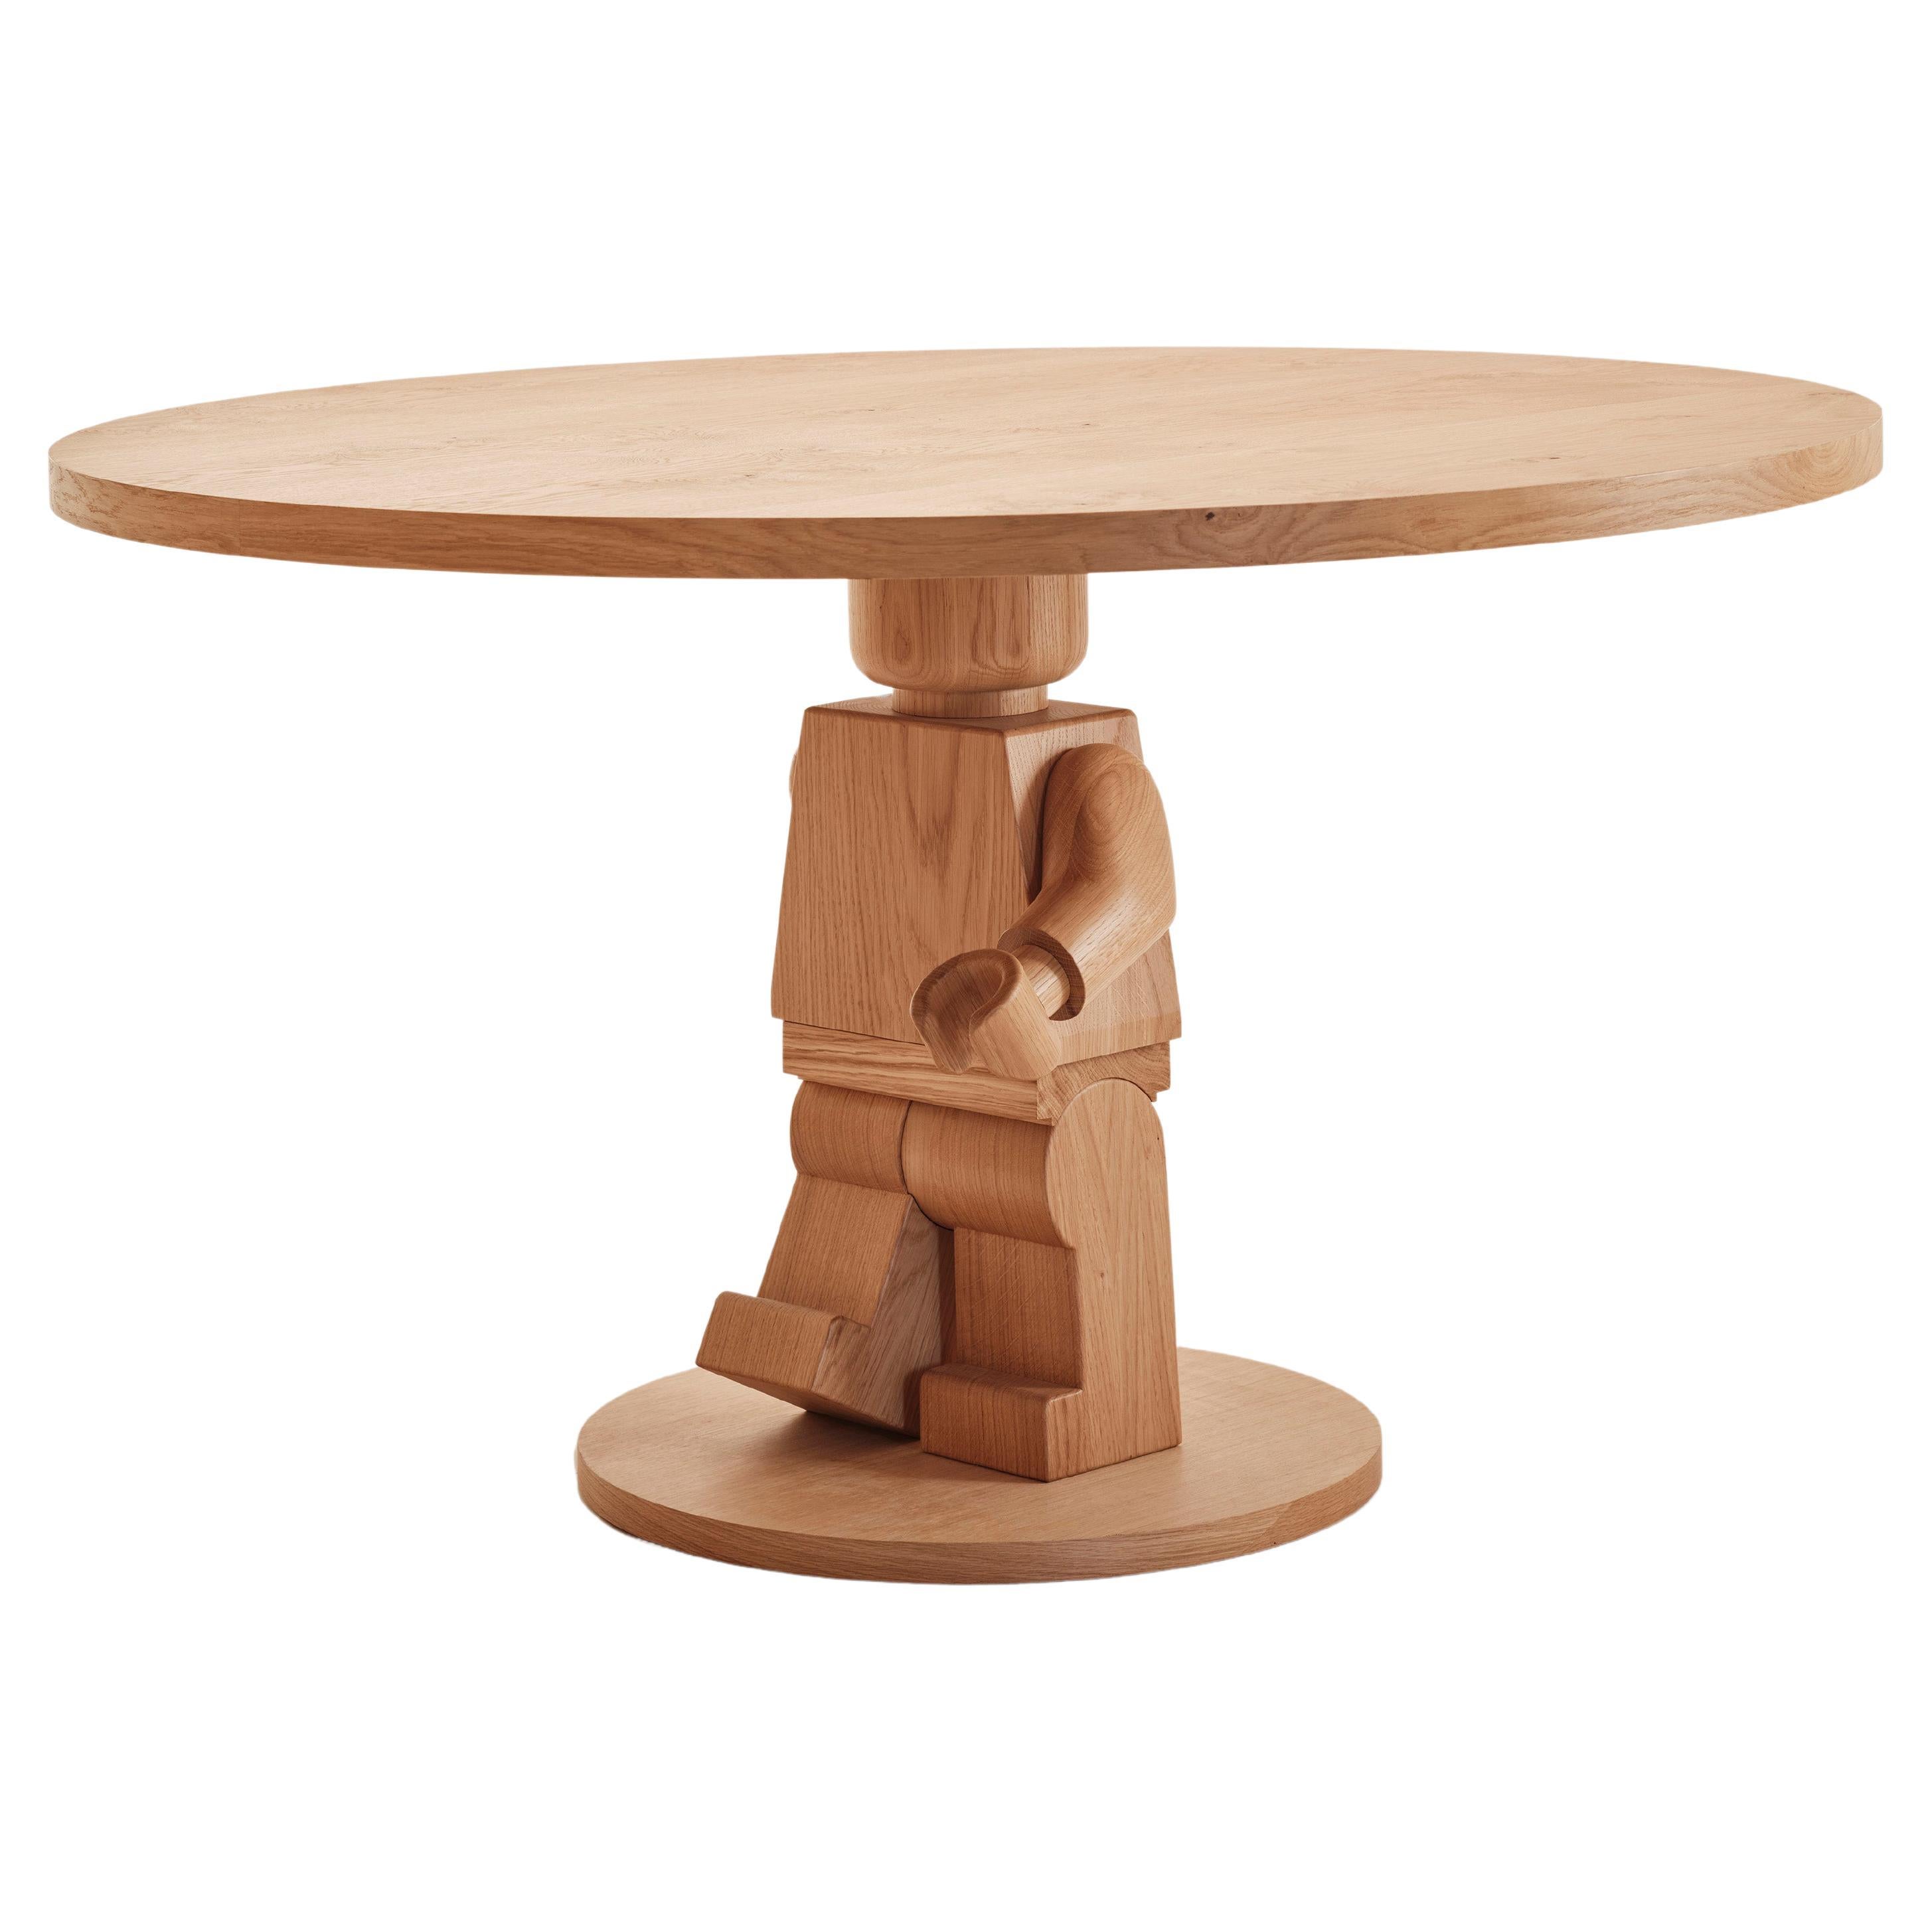 Contemporary Oak Round Table with Lego Sculpture Base, for SoShiro by Interni For Sale